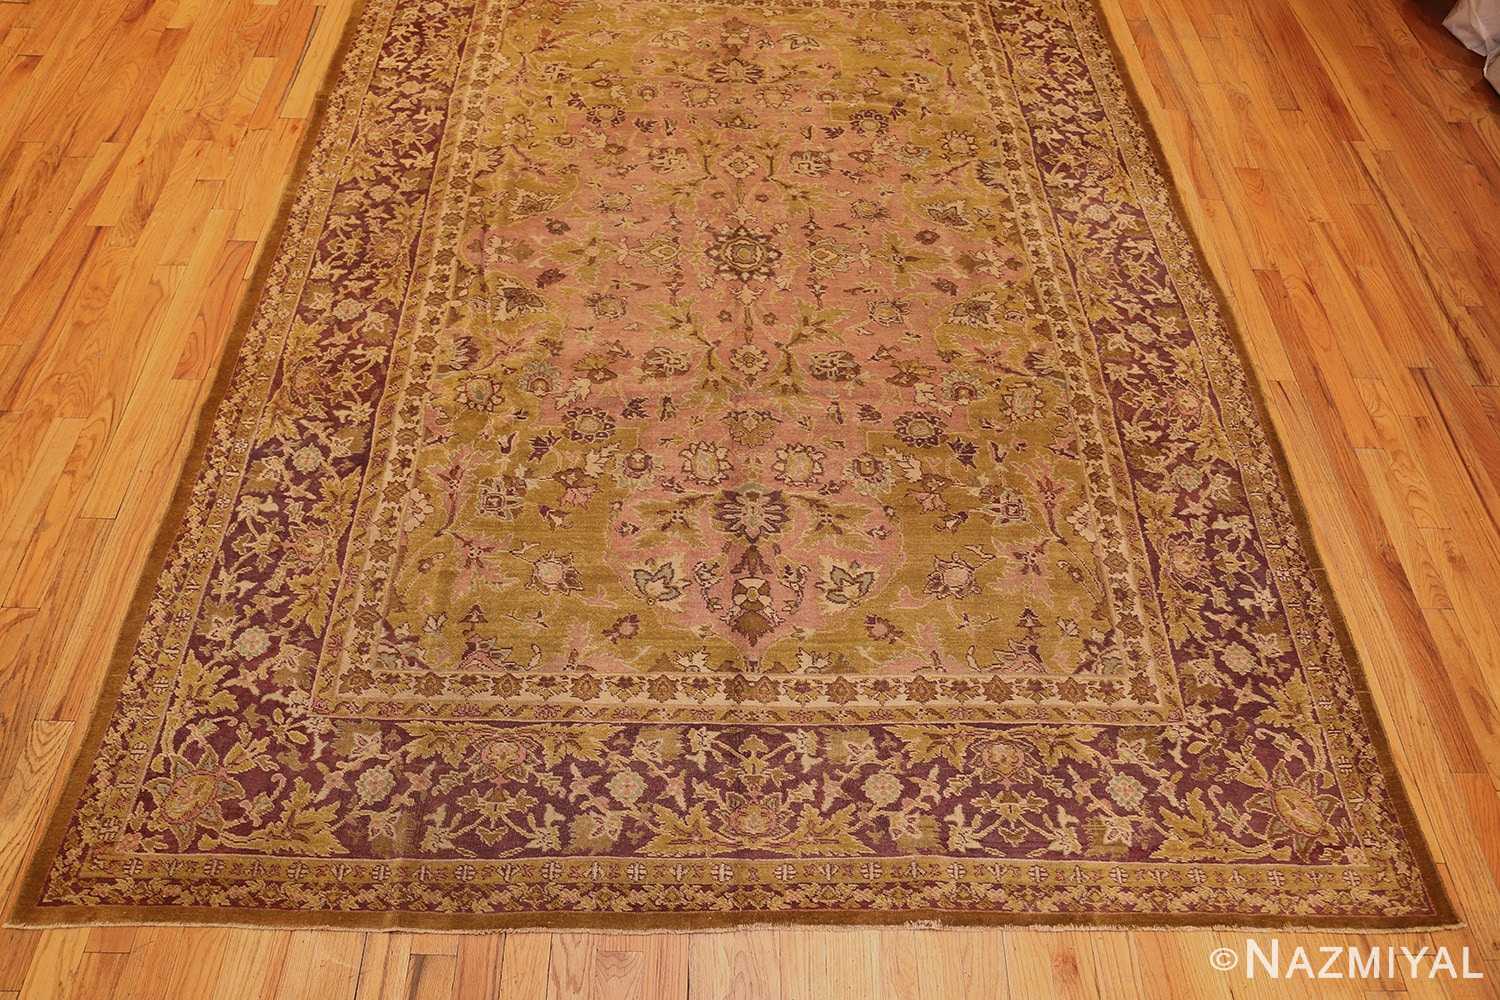 Whole View Of Polonaise Design Late 19th Century Antique Indian Agra Rug 48840 by Nazmiyal NYC